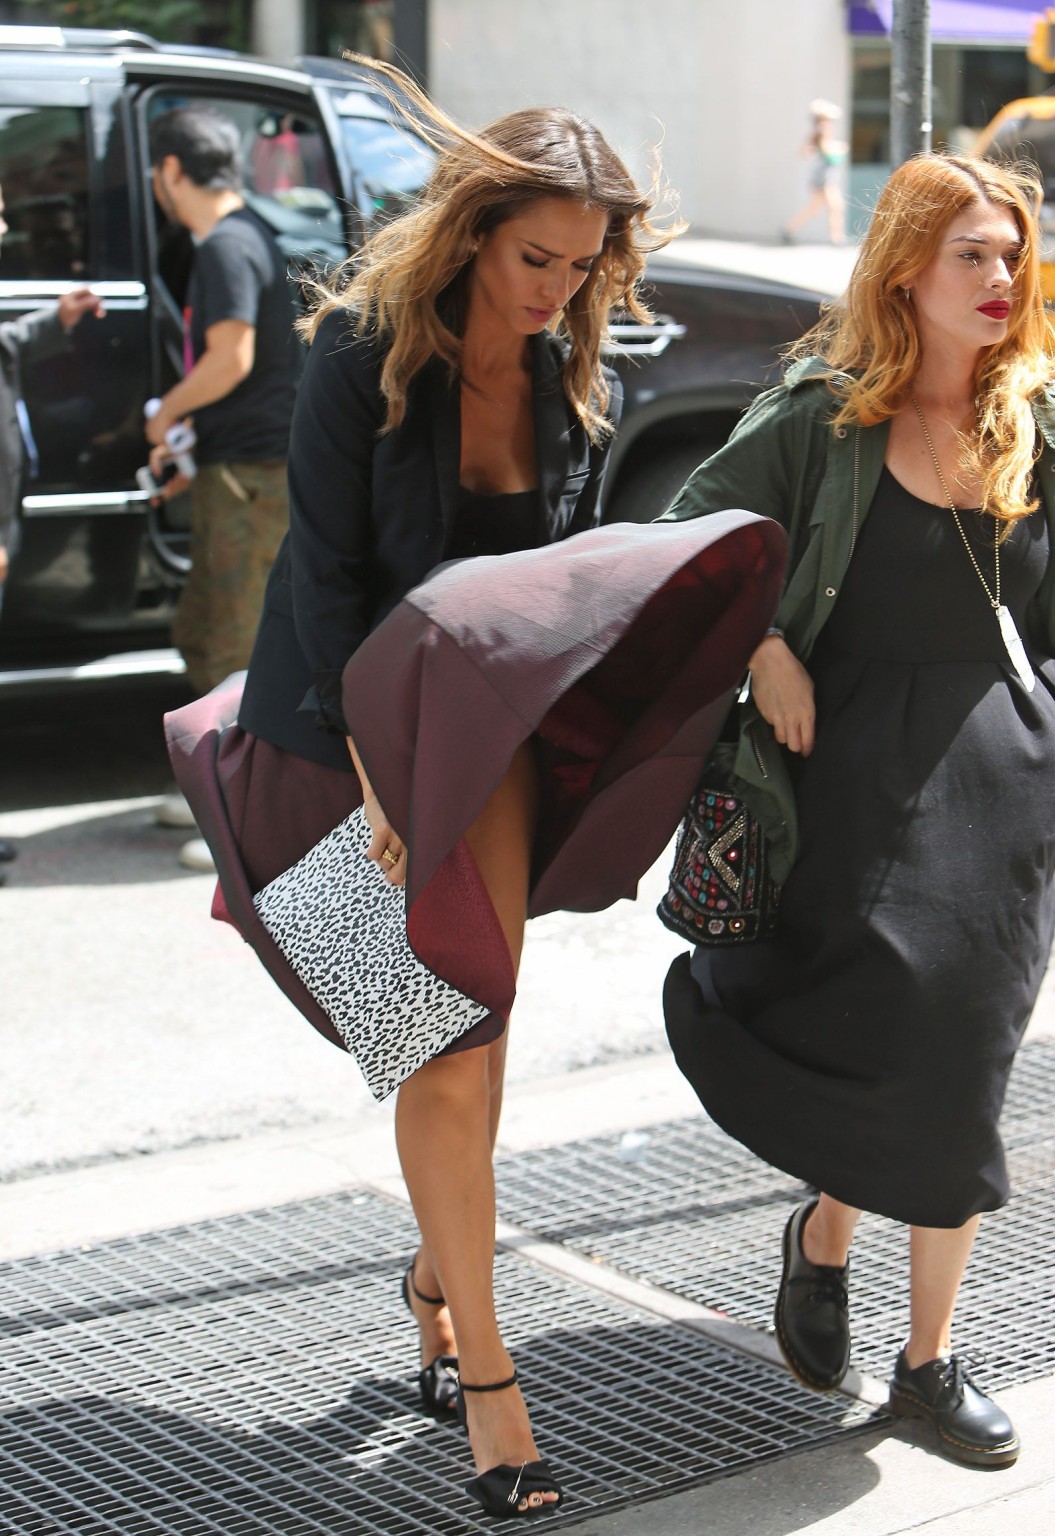 Jessica Alba upskirt and shows cleavage leaving the Trump SoHo Hotel in NYC #75188249